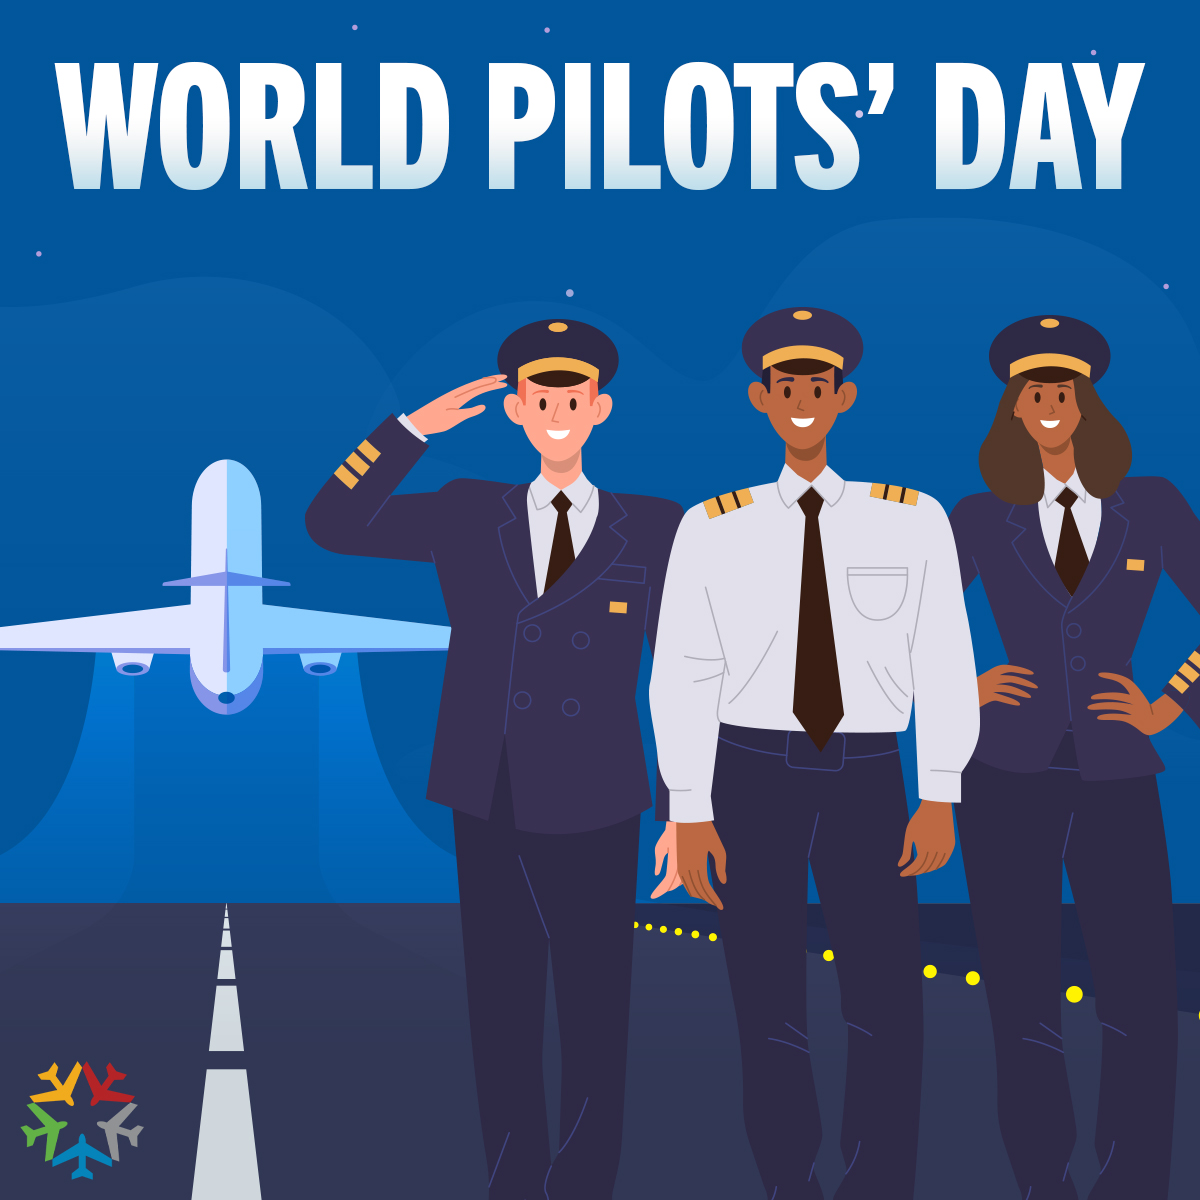 Happy #WorldPilotsDay! Today, we celebrate and thank the pilots who fly more than 2.6 million passengers and 61,000 tons of cargo to their destinations each day! ✈️